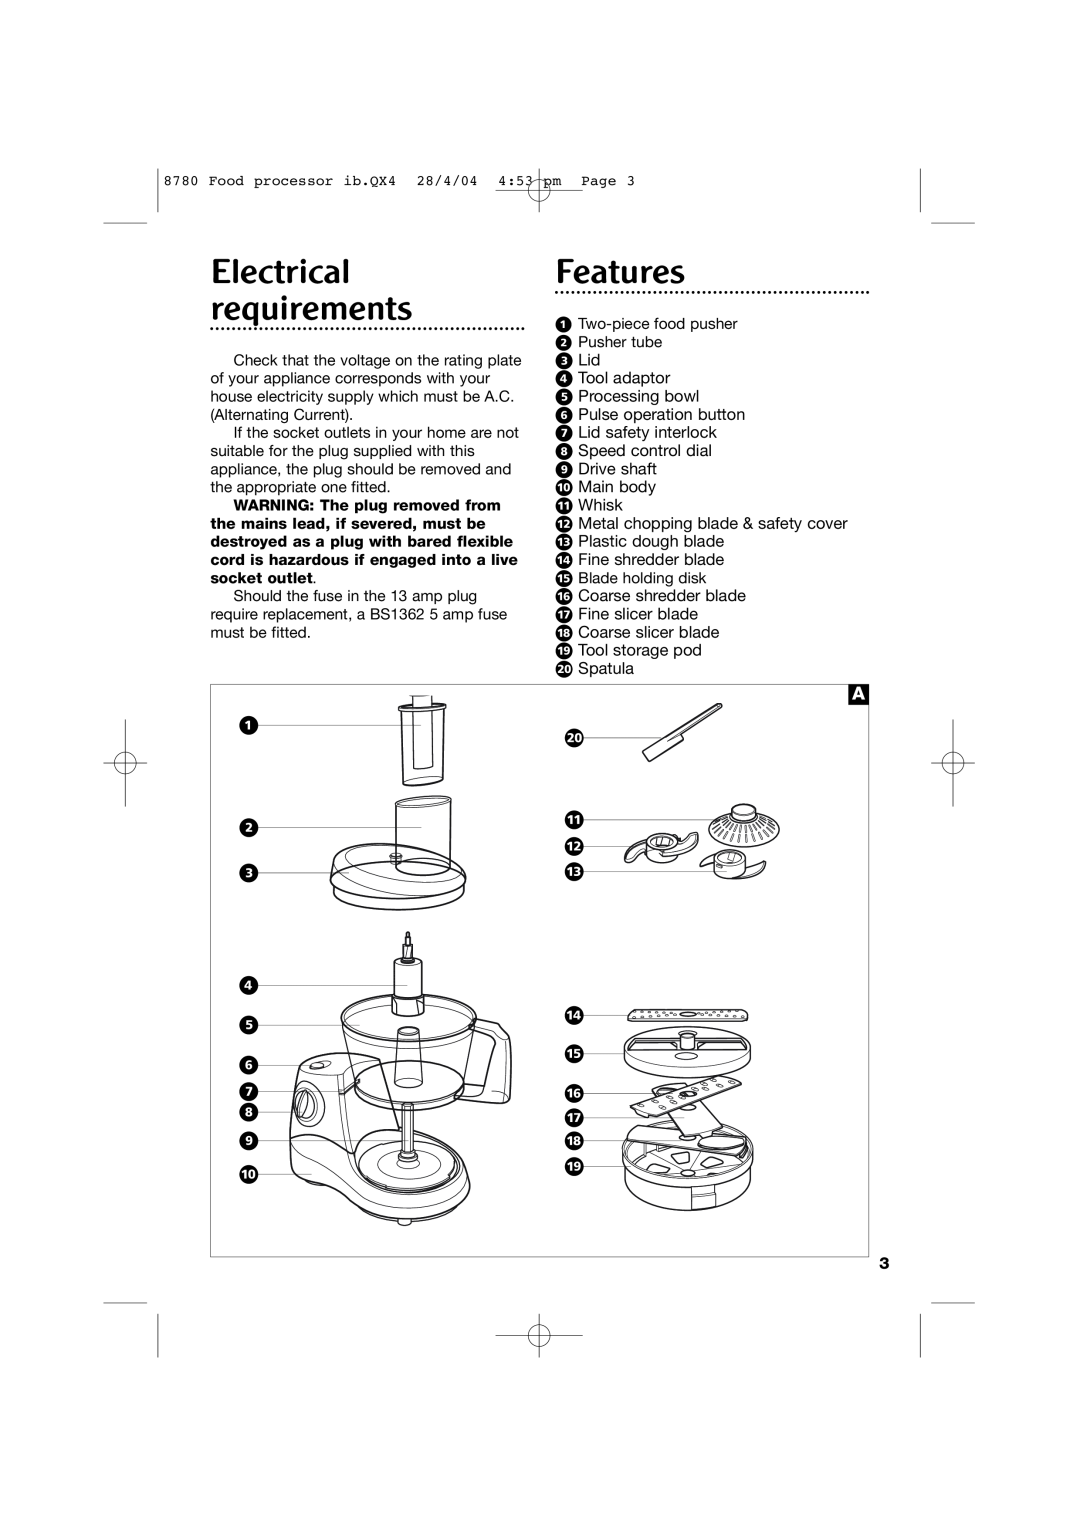 Morphy Richards 8780 manual Electrical requirements, Features 